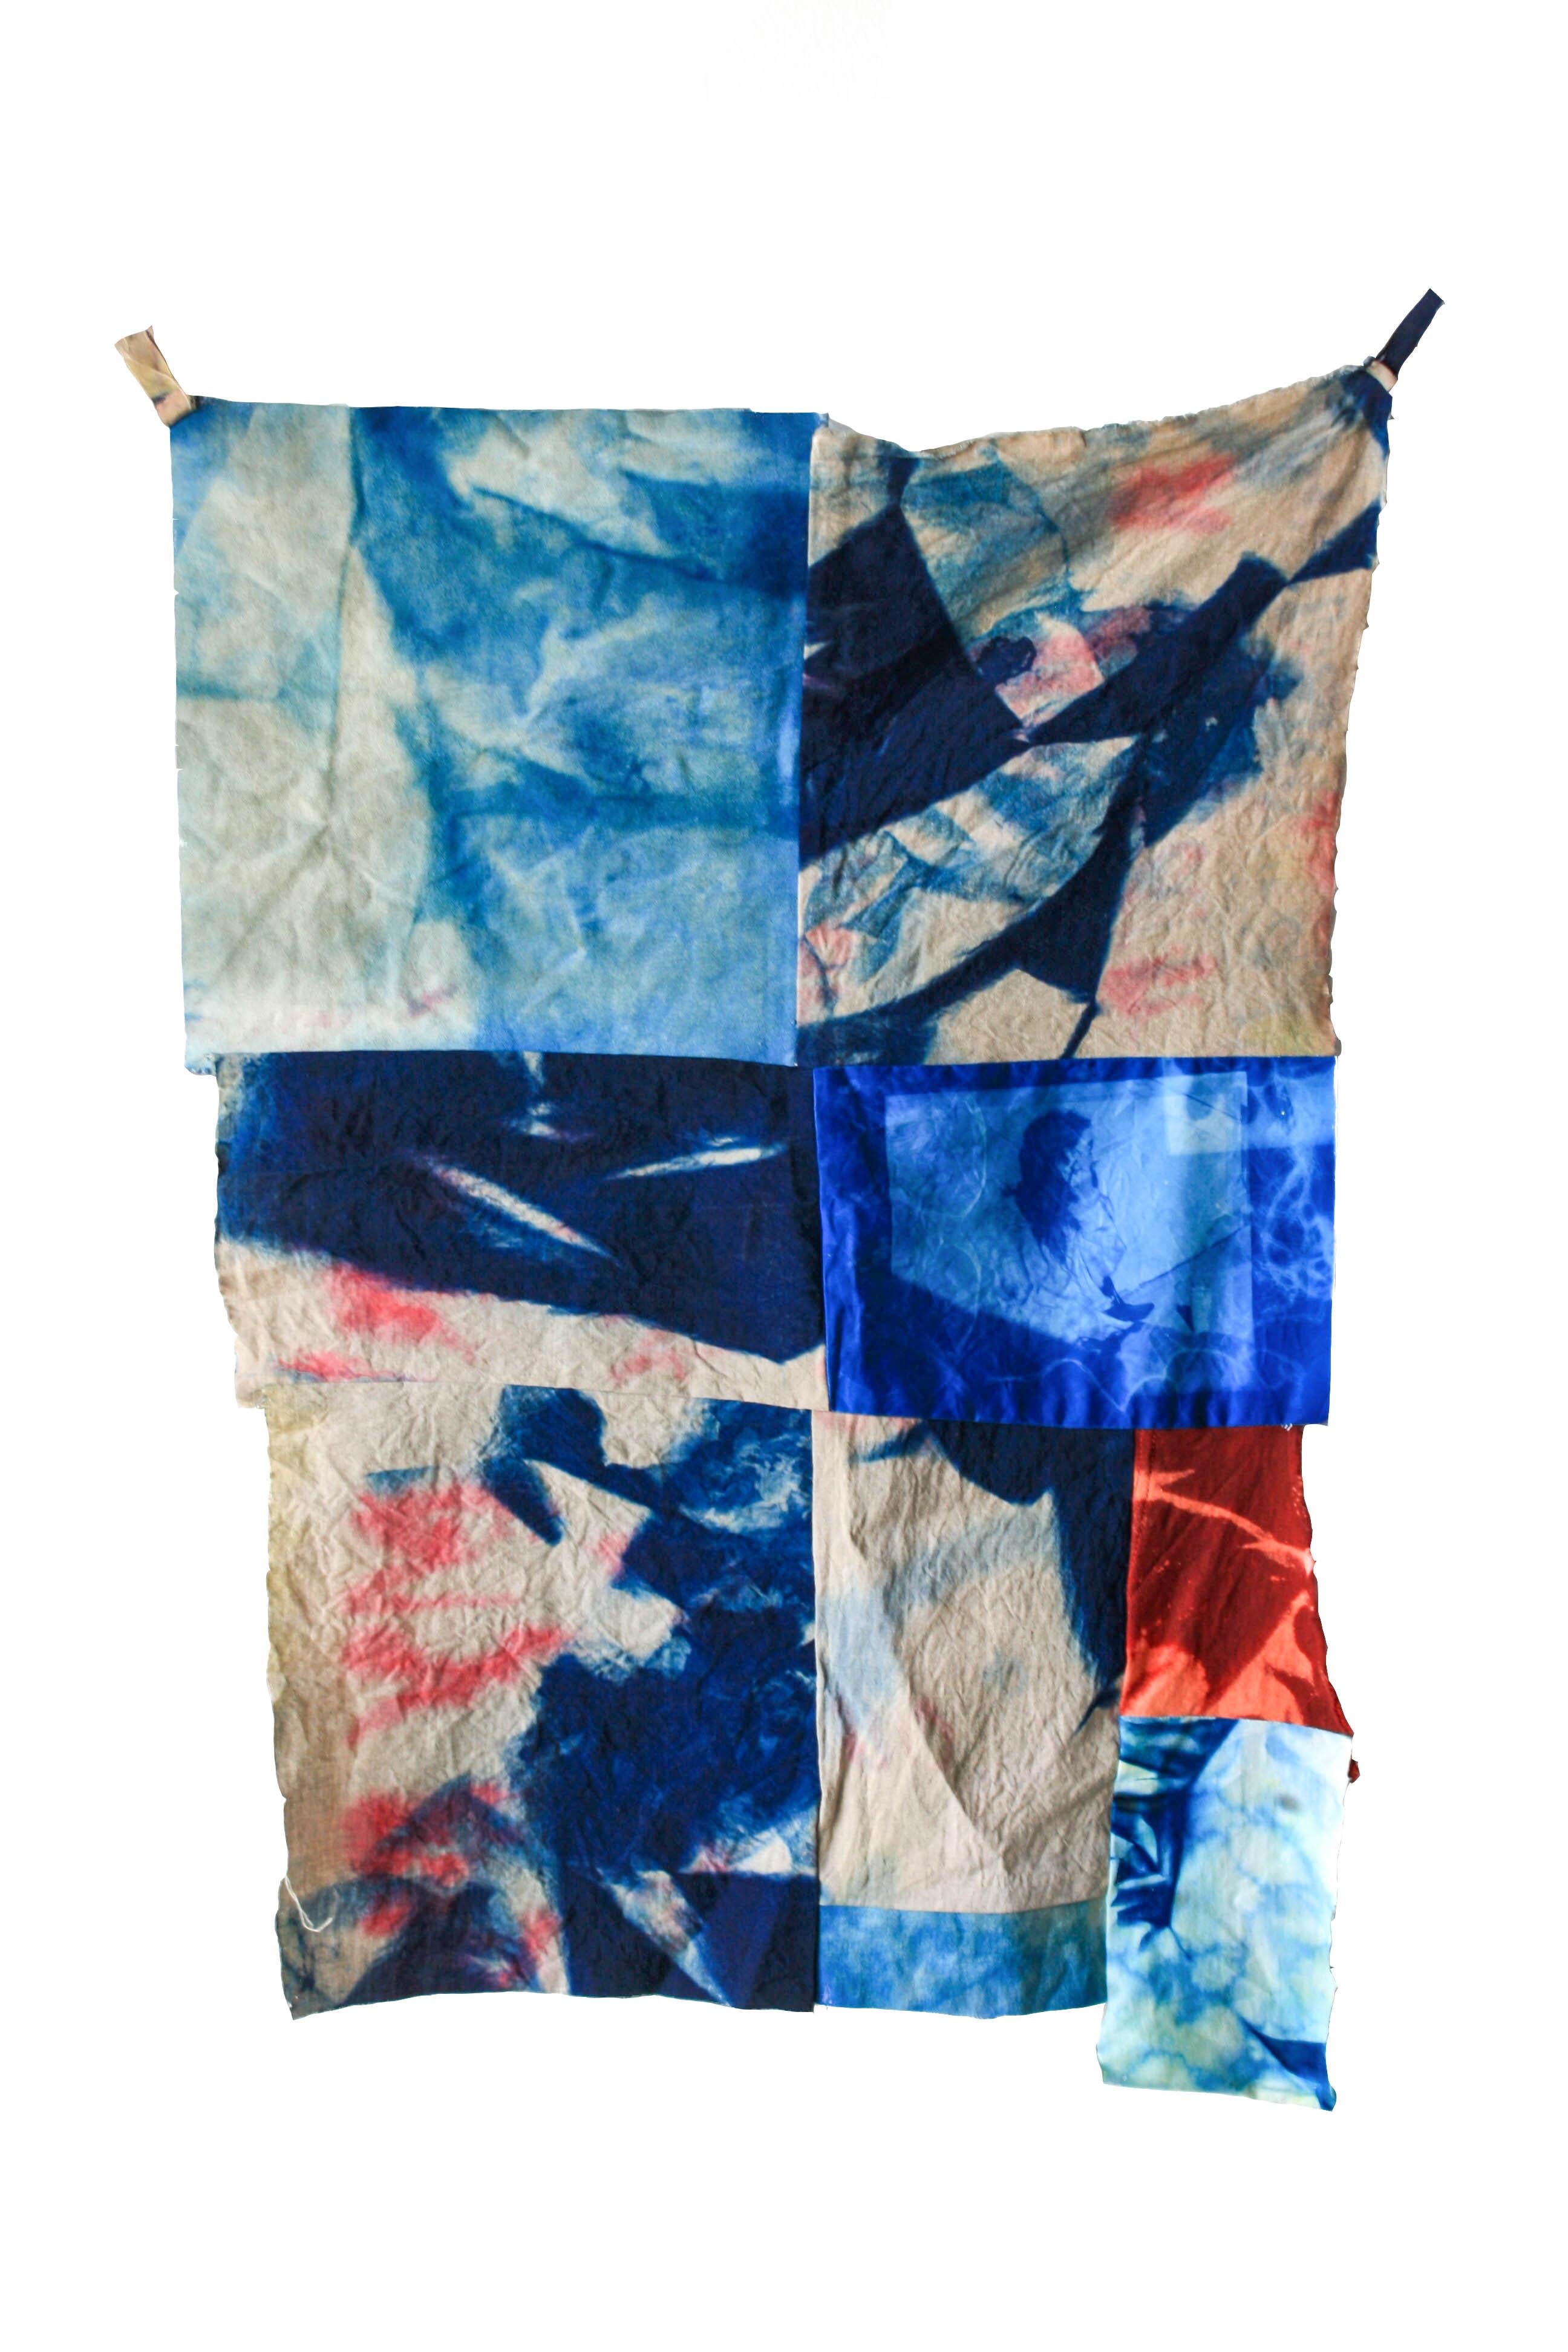 Current- Canvas, Dye, Fabric, Linen, Mixed Media, Abstract, Cyanotype, Blue, Red - Mixed Media Art by Georganna Greene